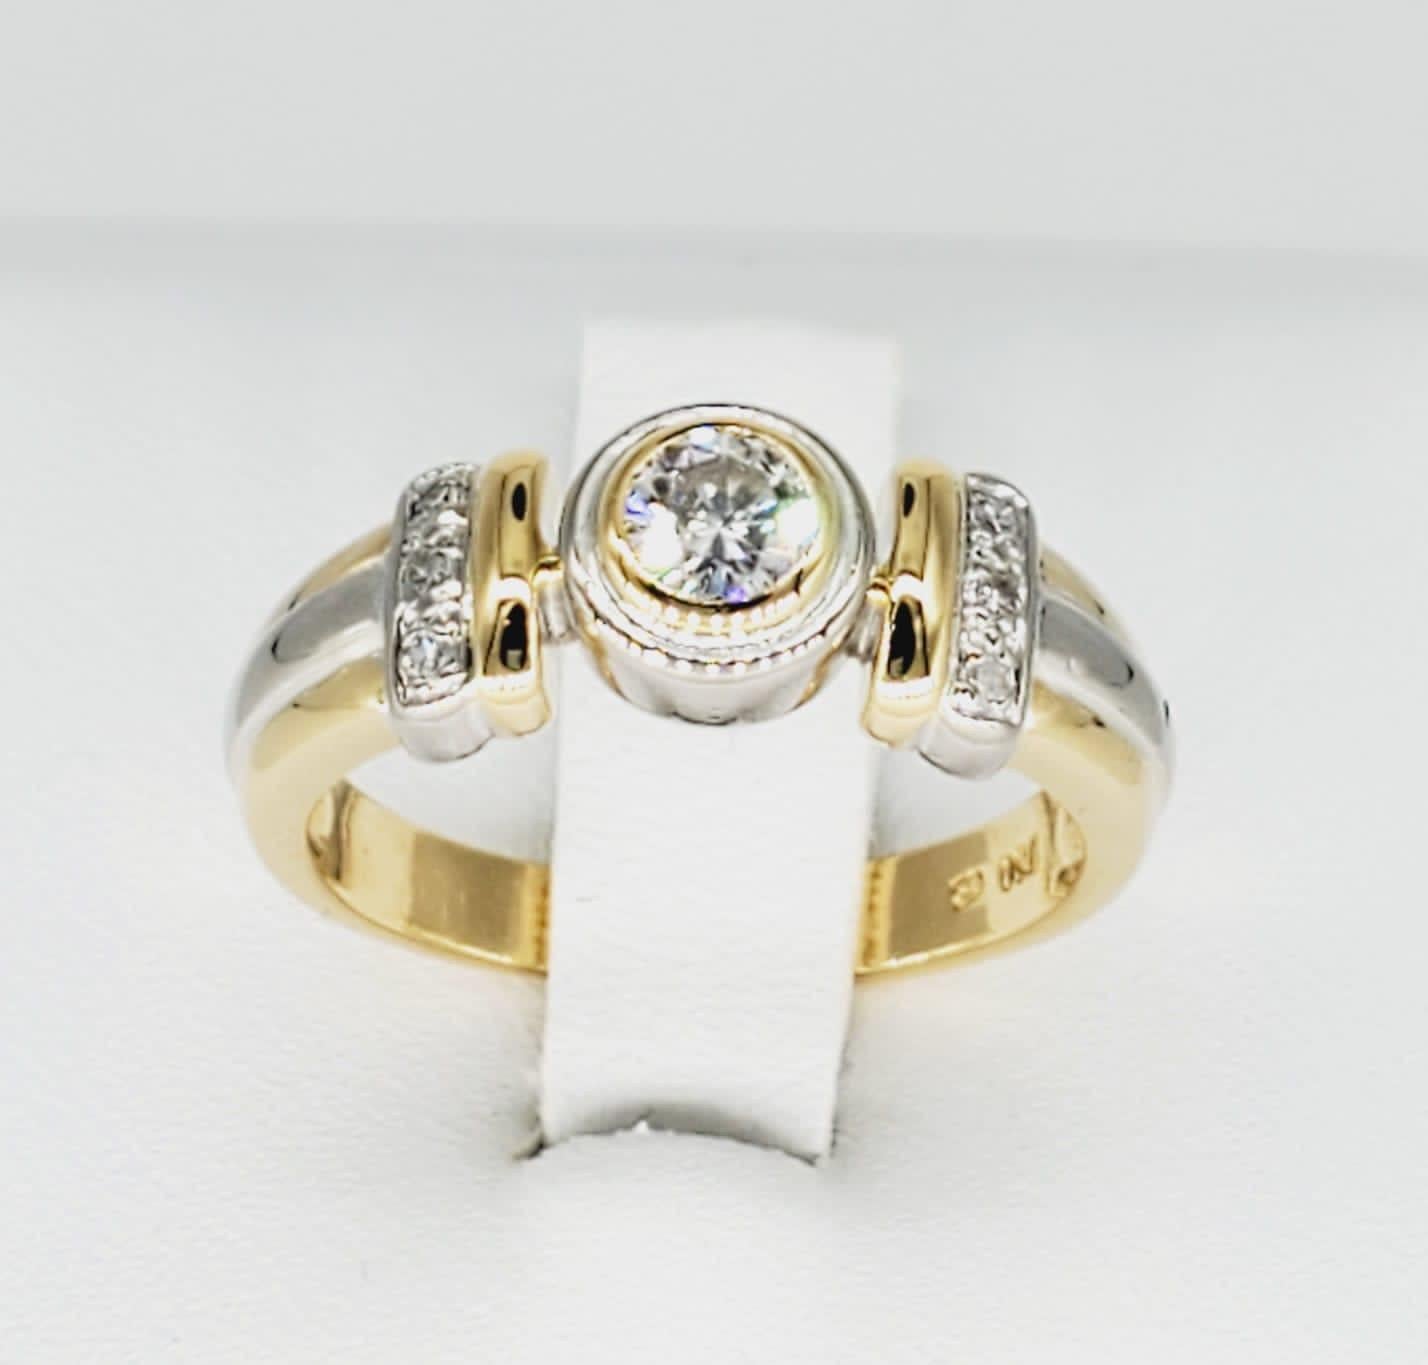 Vintage Two-Tone 0.30 Carat Diamond Bezel Ring. The ring features center 0.20 carat Diamond and 0.10 carat on the sides. The ring is a size 6.75 and weights 6.2 grams 18k gold. The ring is stamped 750 for purity. The diamonds are of Vs/Si clarity.